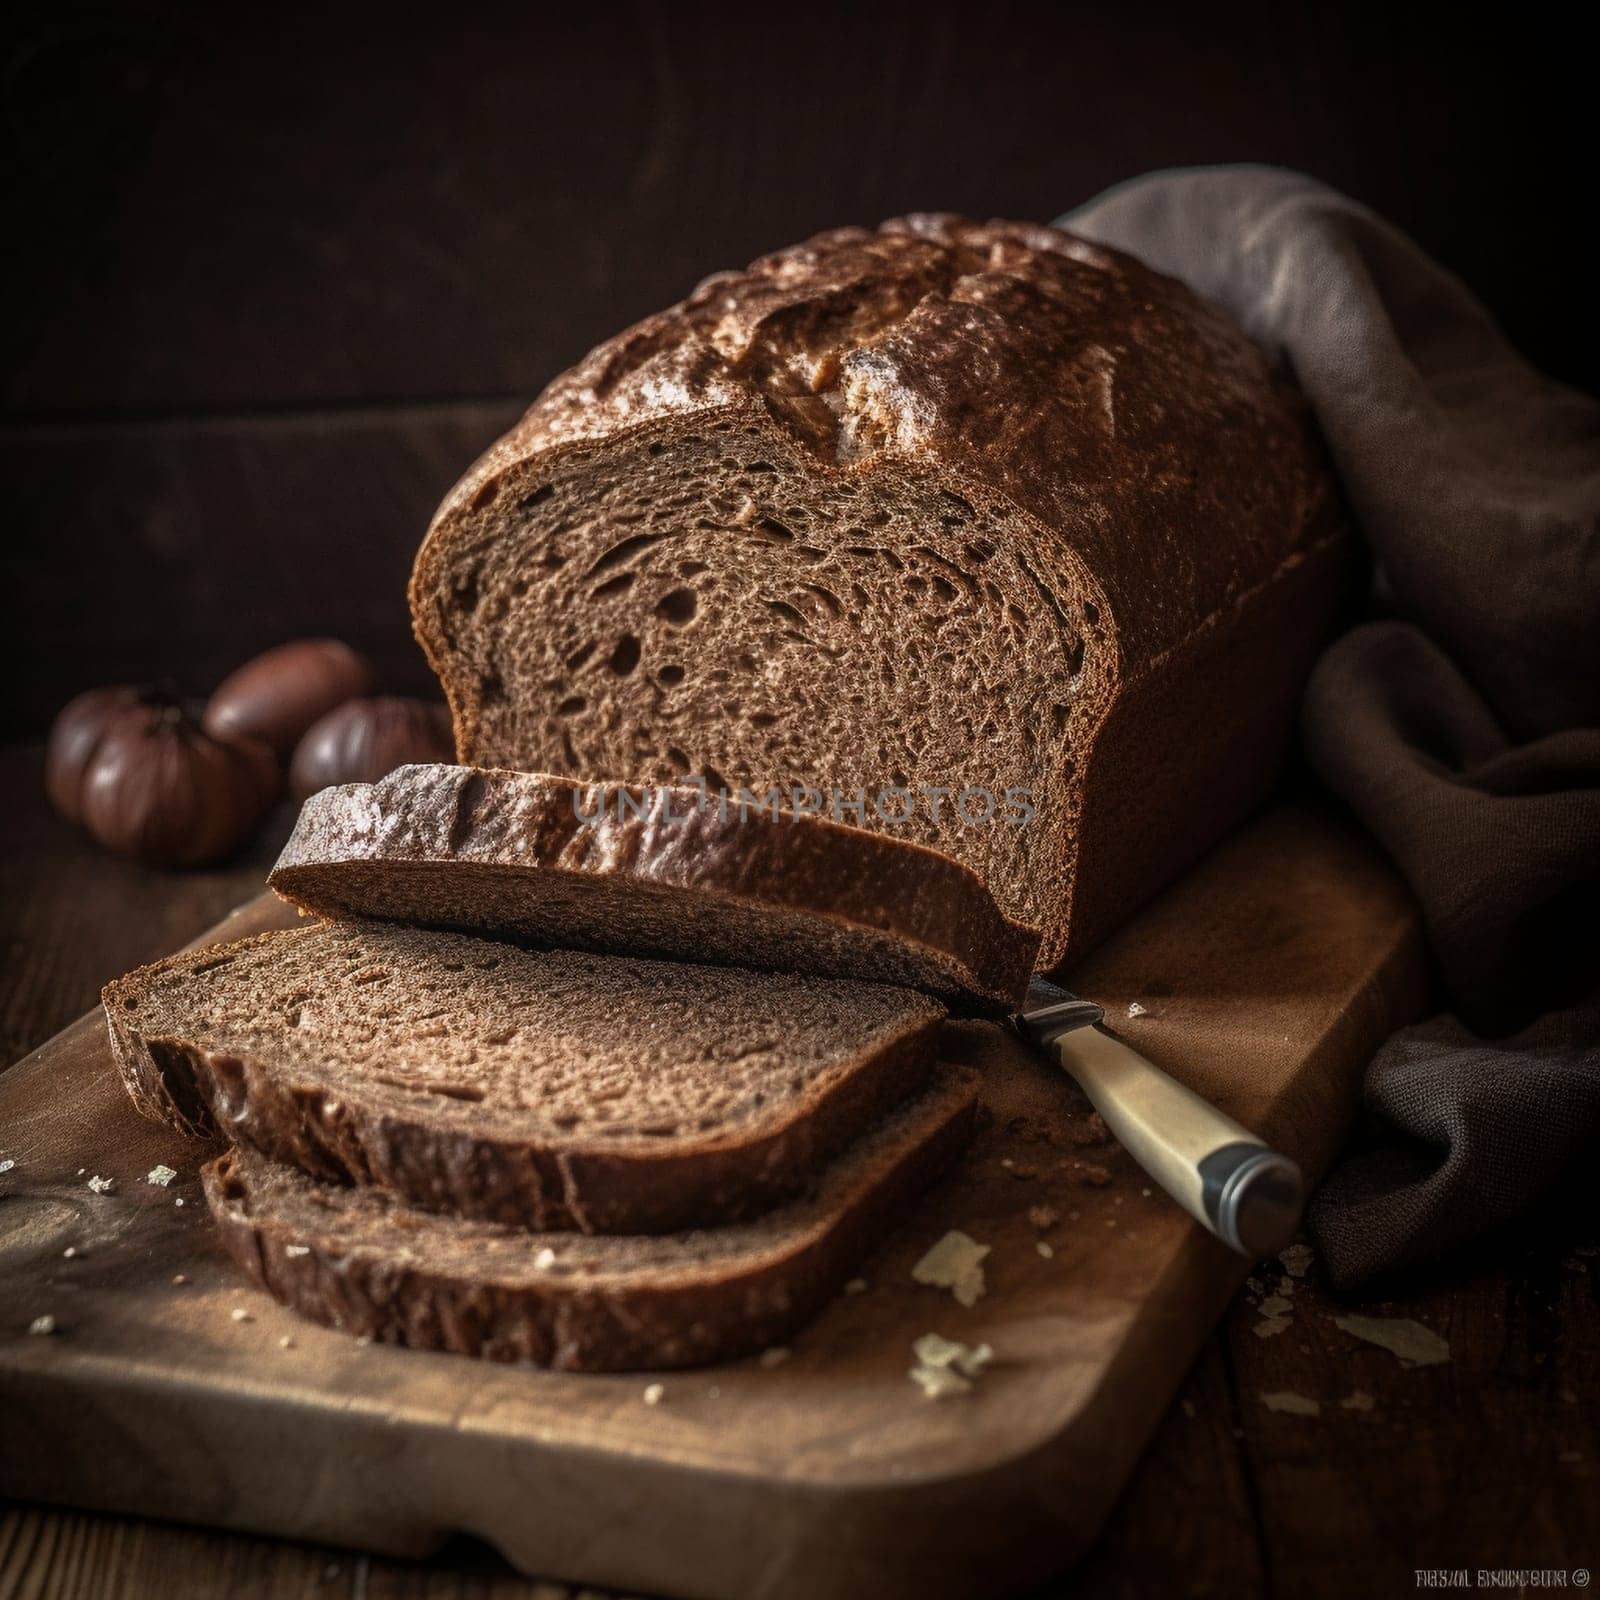 This close-up shot captures the rustic and wholesome flavors of Latvian Rye Bread, a dark and dense bread with a rich and earthy flavor and a chewy texture that's perfect for soaking up butter or spreads. In this image, the Rye Bread is served with a side of cheese, adding to the savory taste. The simple and minimalistic indoor scene in the background adds to the rustic atmosphere, with cool colors and soft lighting enhancing the mood. The cool, diffused lighting and use of a reflector highlight the texture and colors of the bread, creating a wholesome and rustic mood.